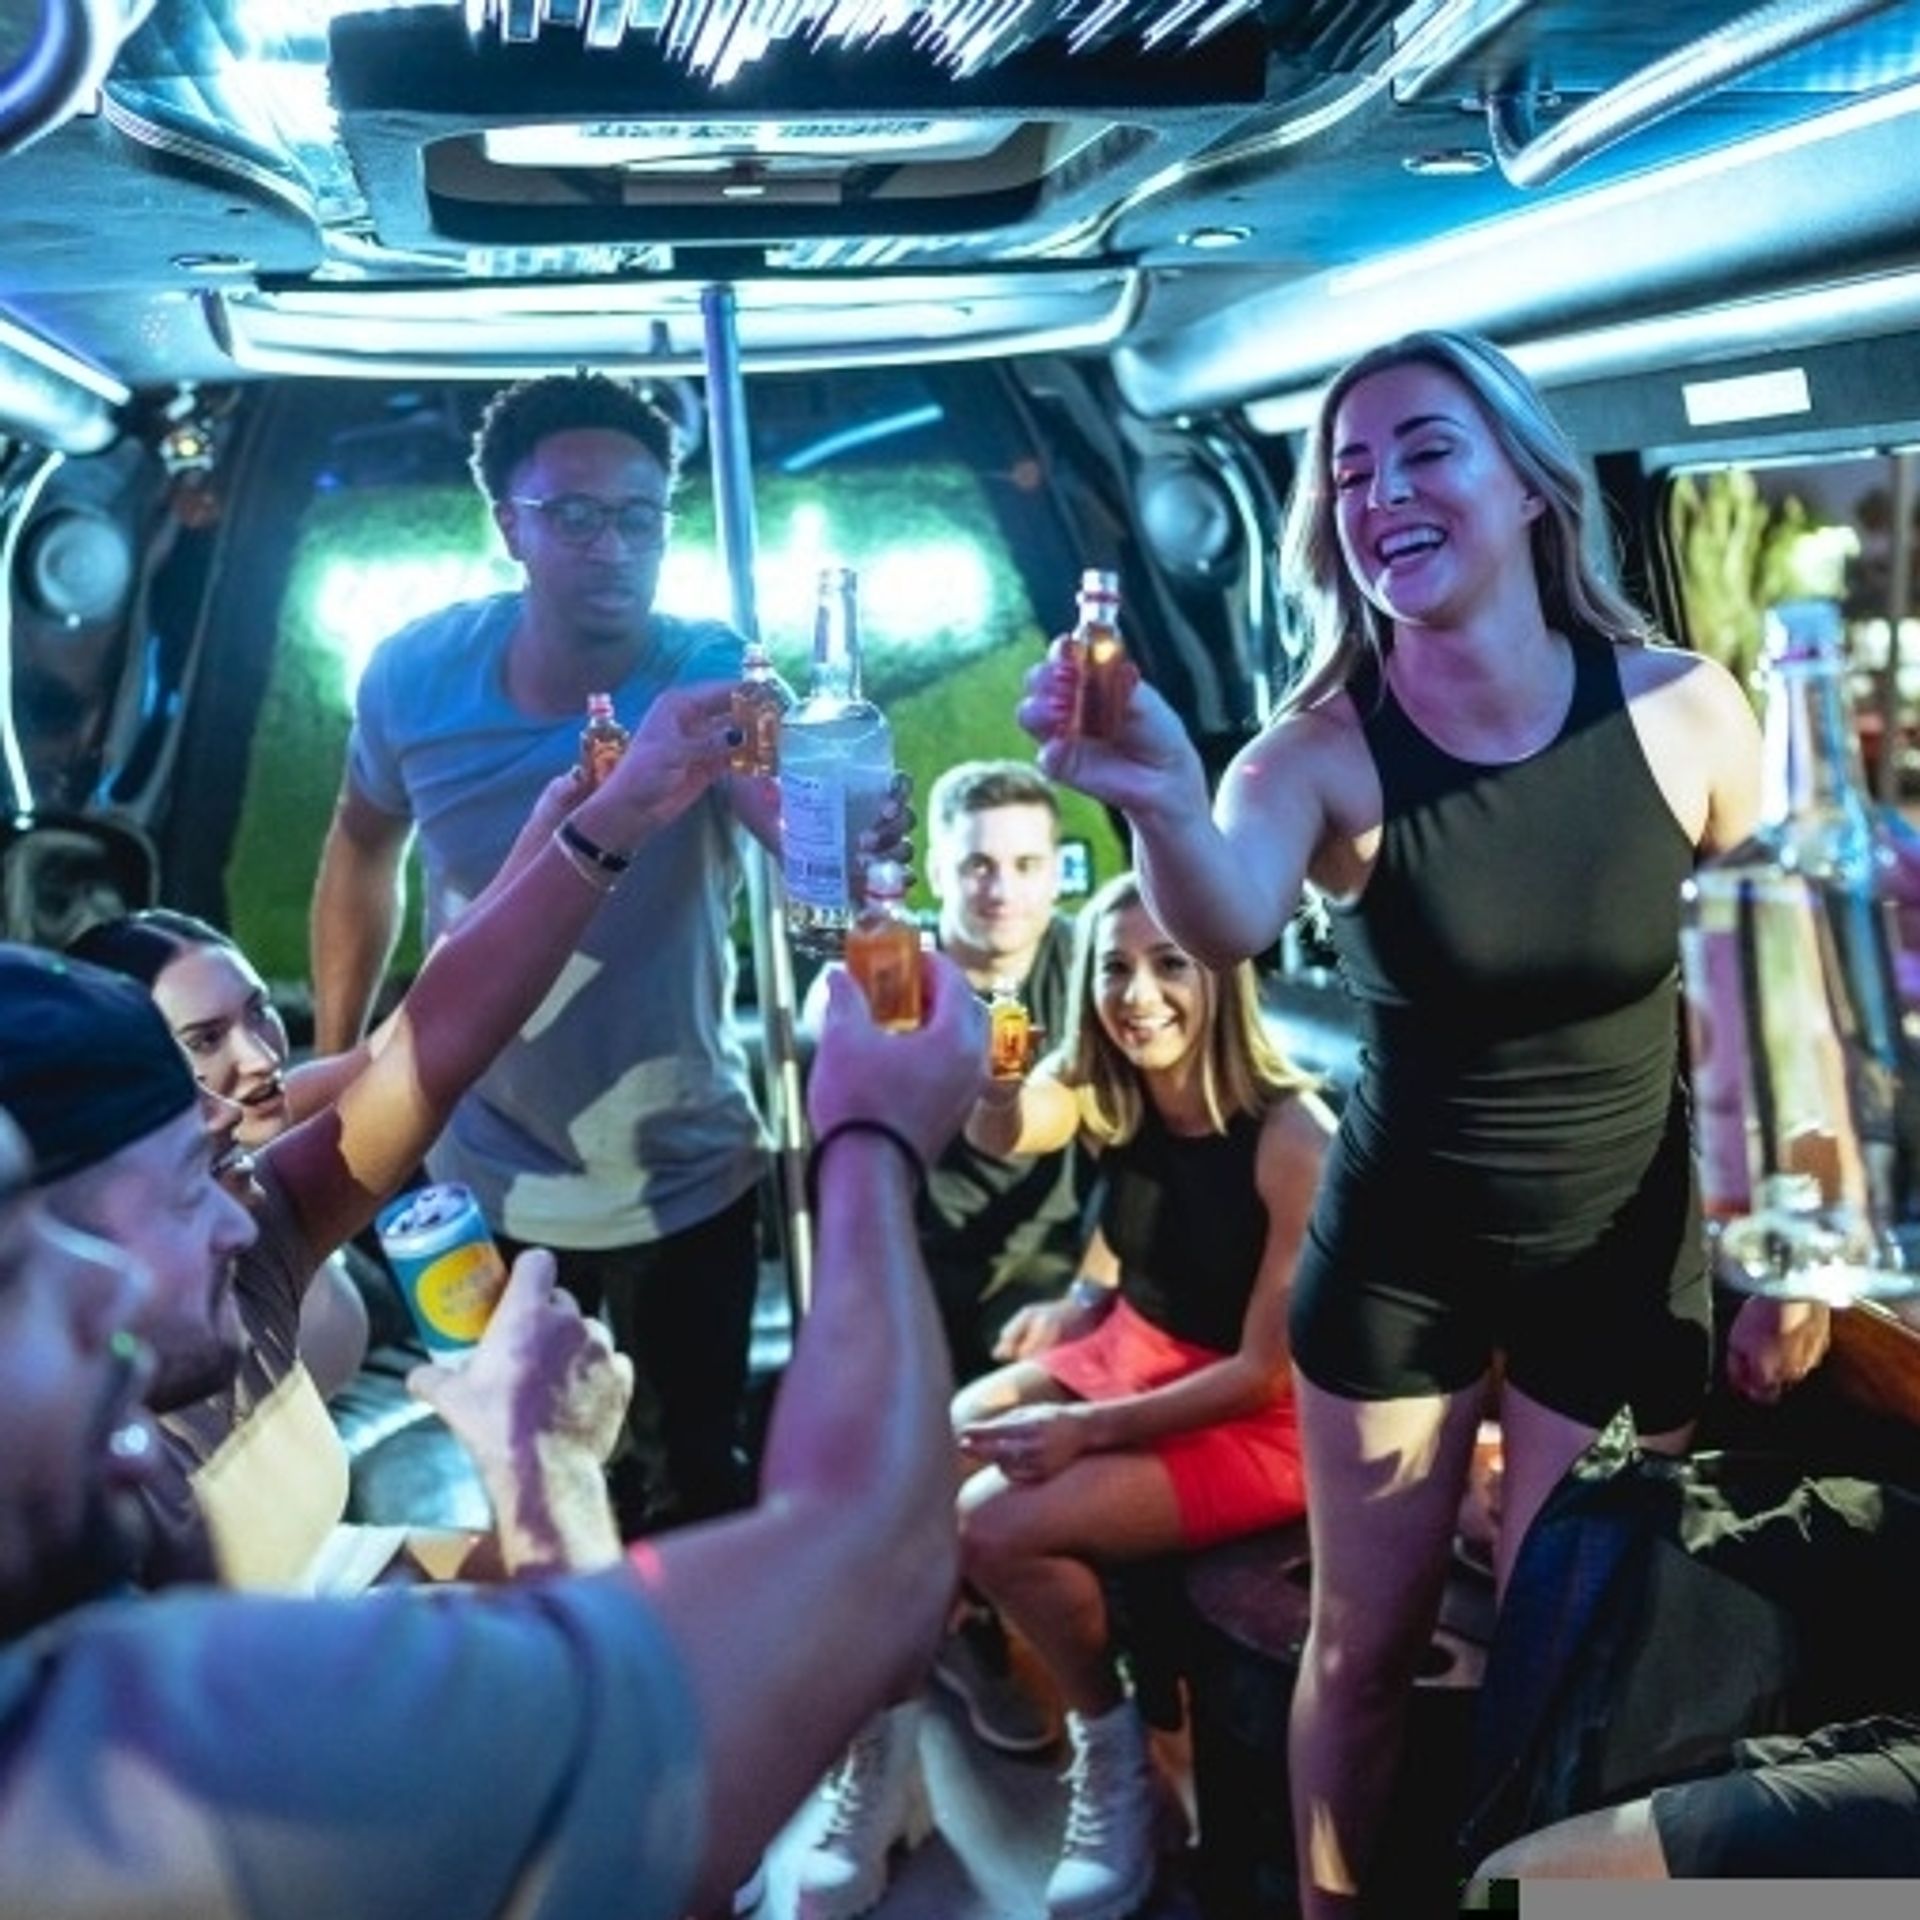 Scottsdale Party Bus Crawler: 2 Hour Open-Air Party Bus Experience image 3